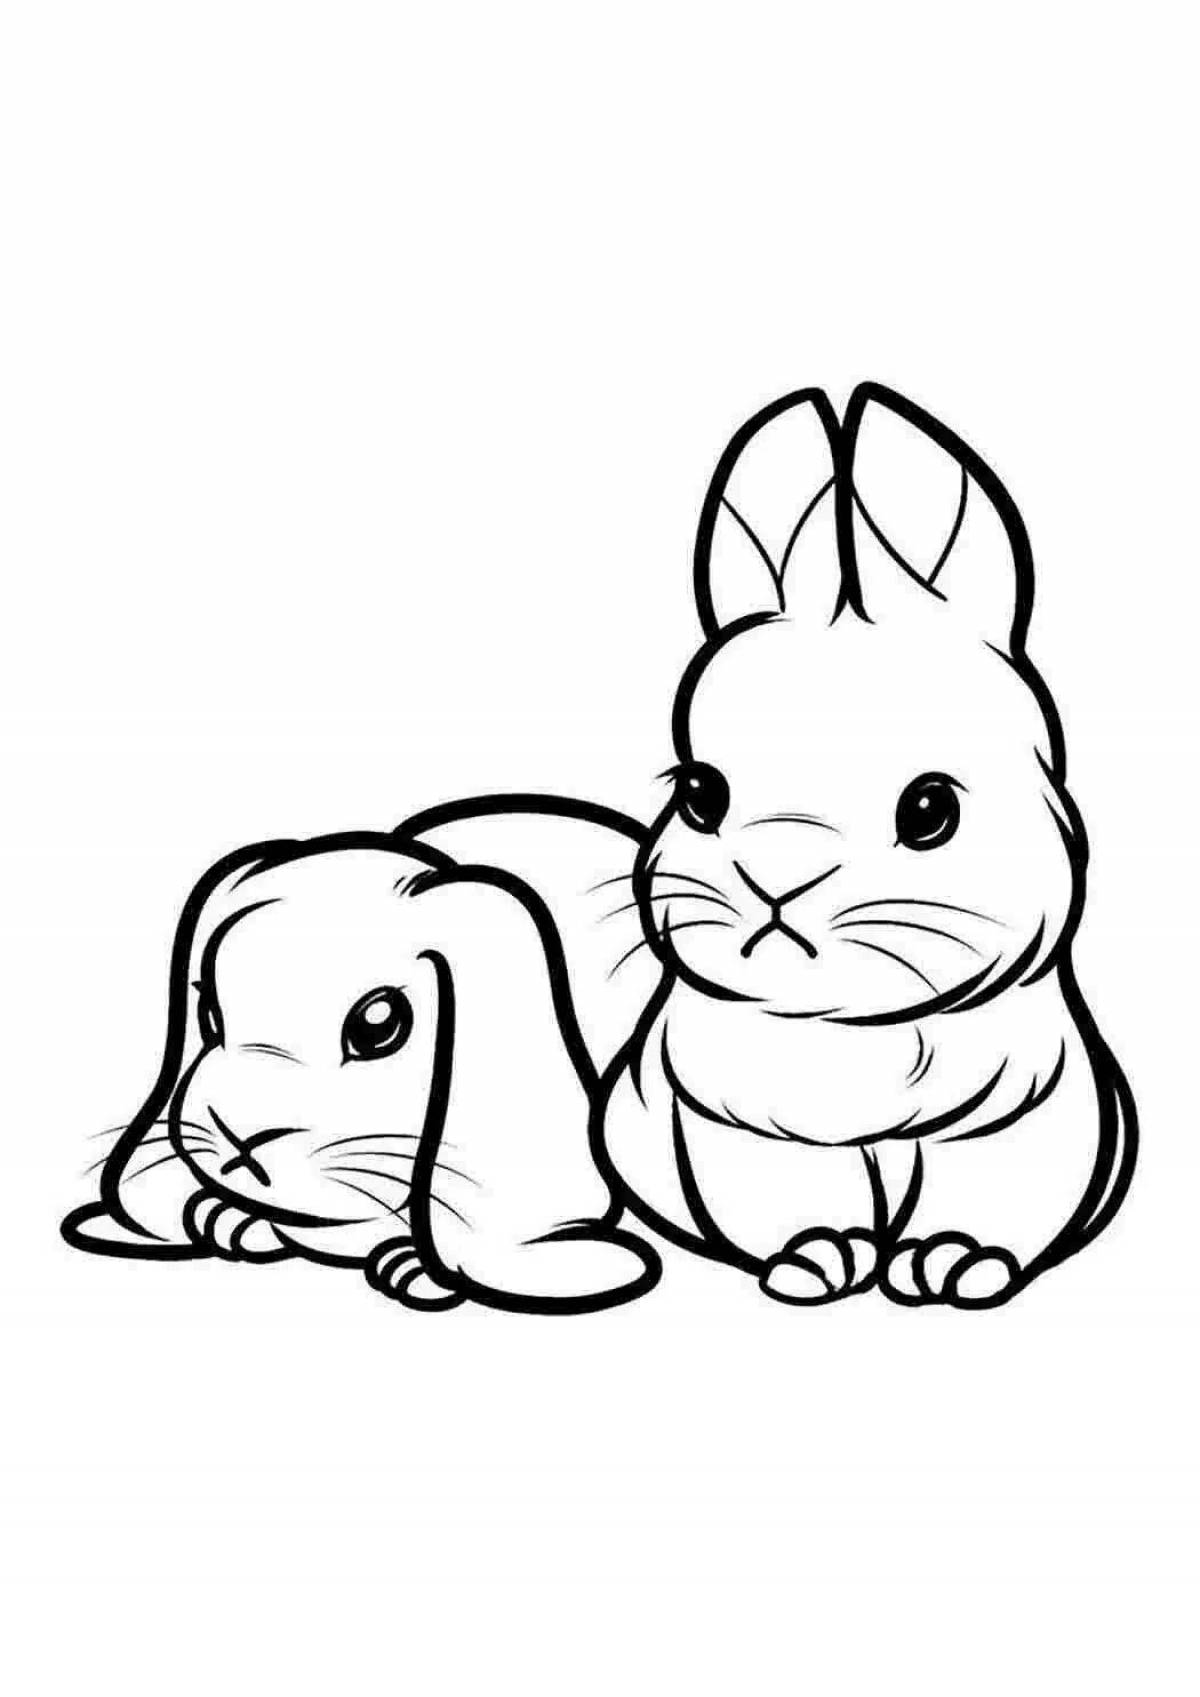 Cat and bunny #16